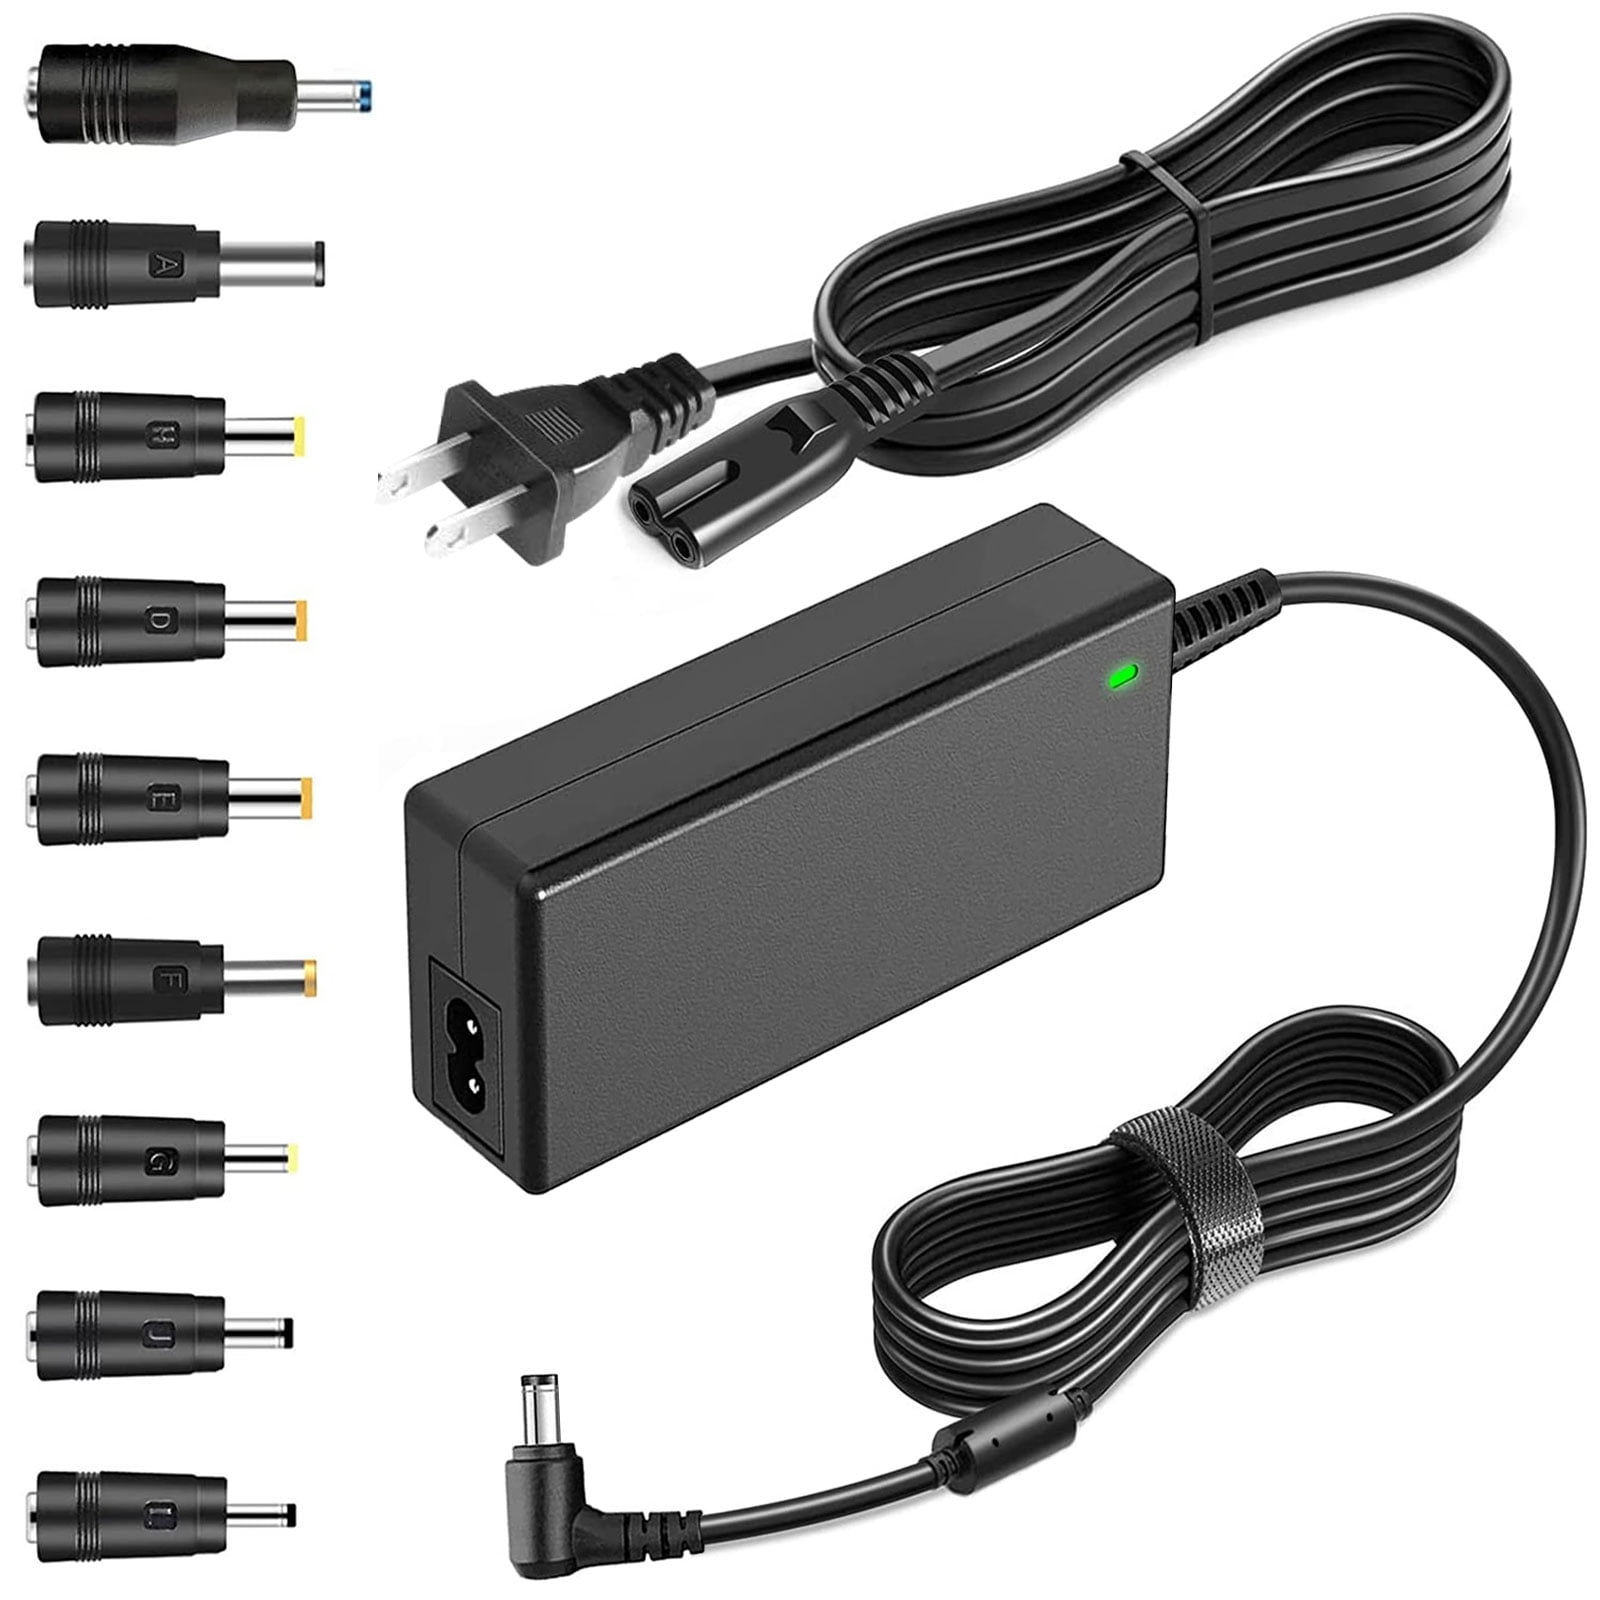 19V 3.42A Laptop Charger 65W AC Power Adapter Replacement for Toshiba Acer HP Lenovo LG Samsung Monitors Chromebook - Walmart.com